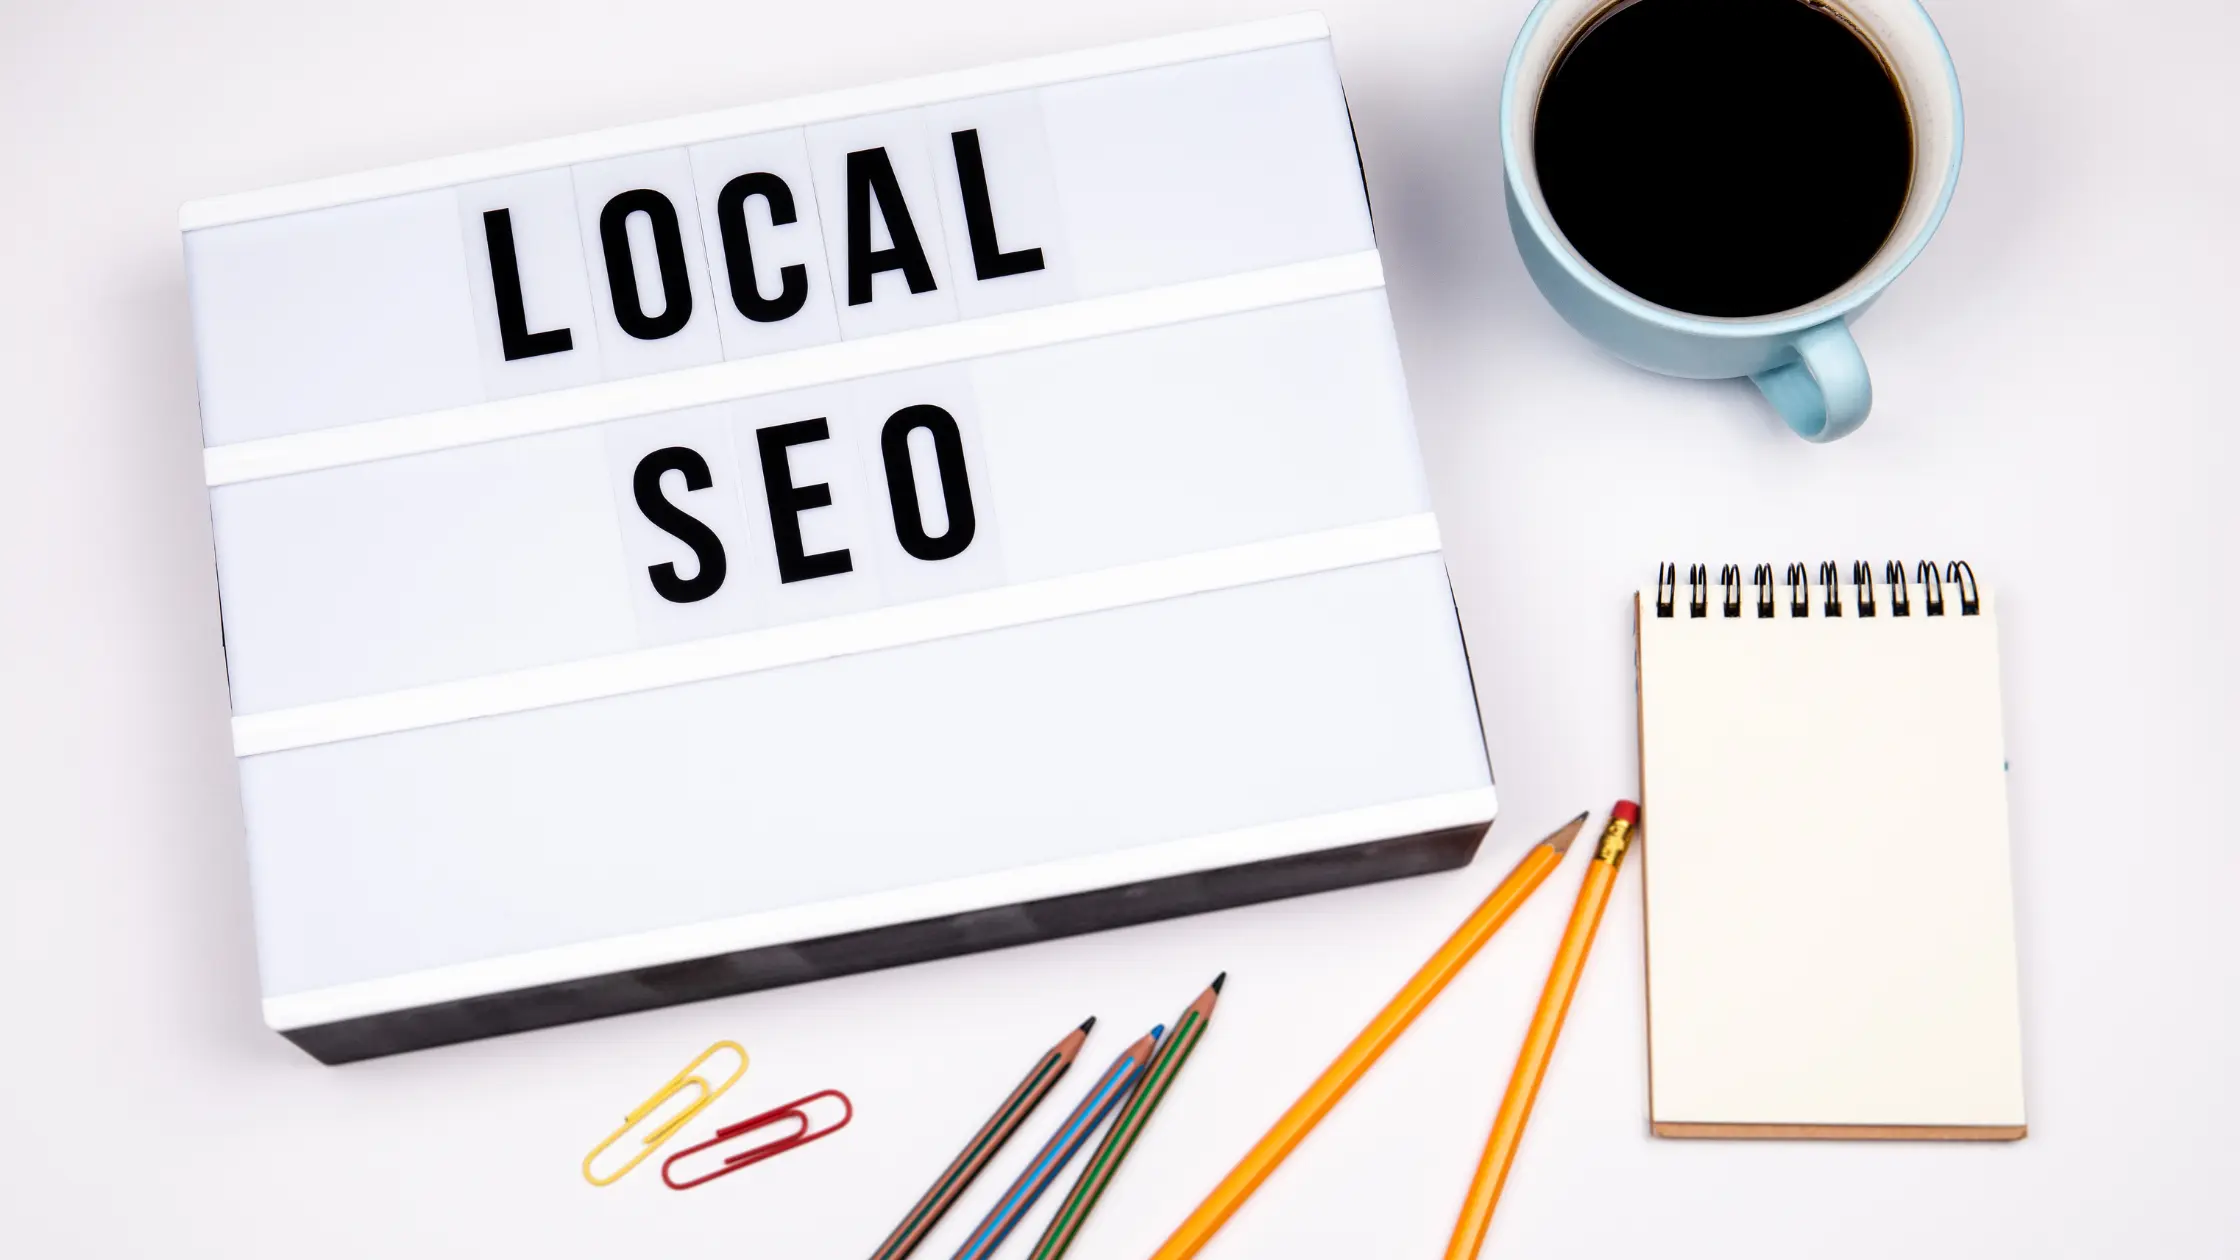 10 Local SEO Tips to Improve Your Ranking in Search Engines